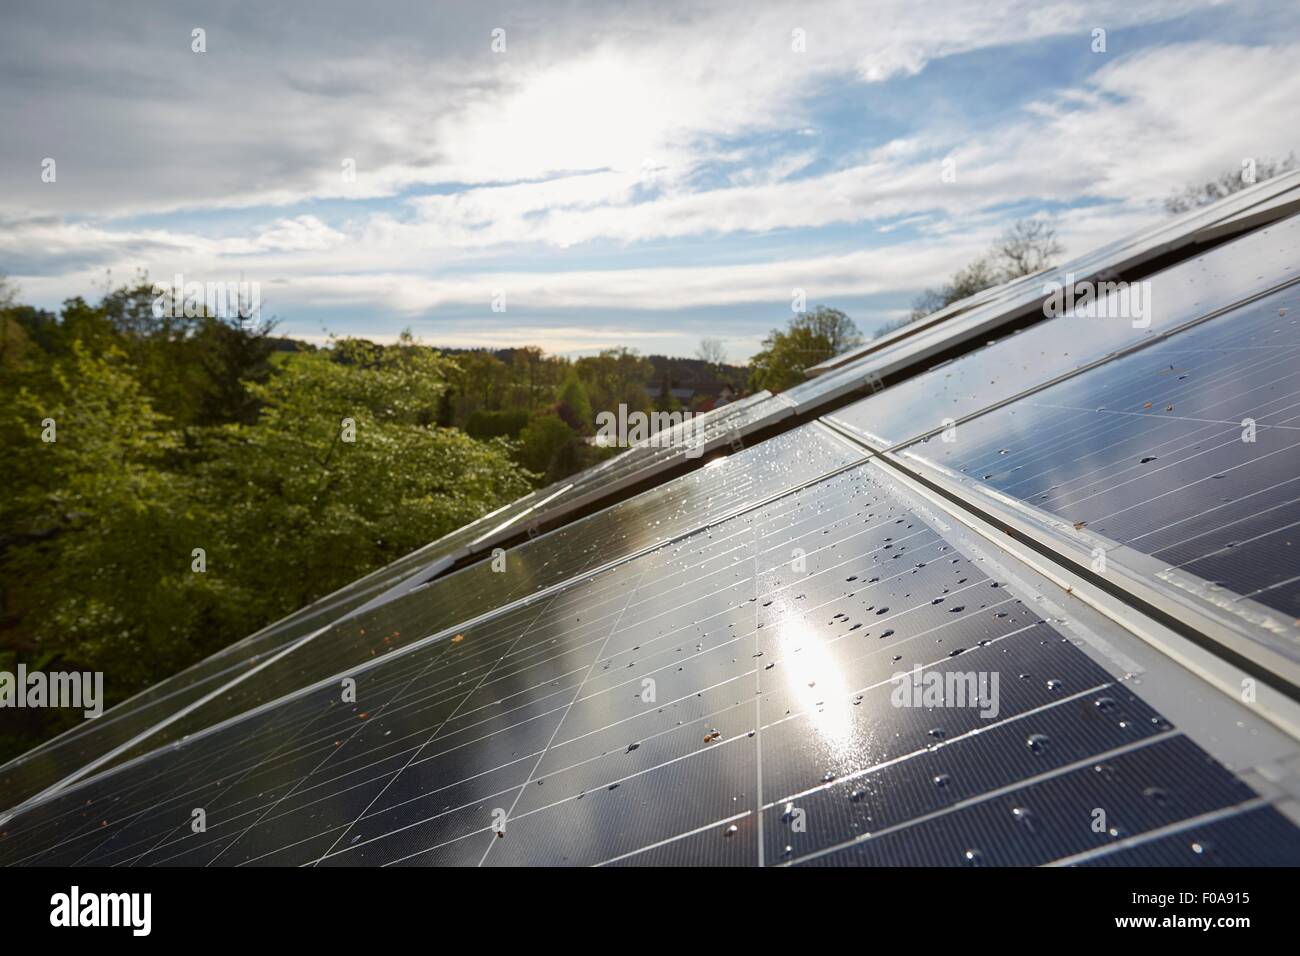 Elevated close up of sunlit solar panels on house roof Stock Photo